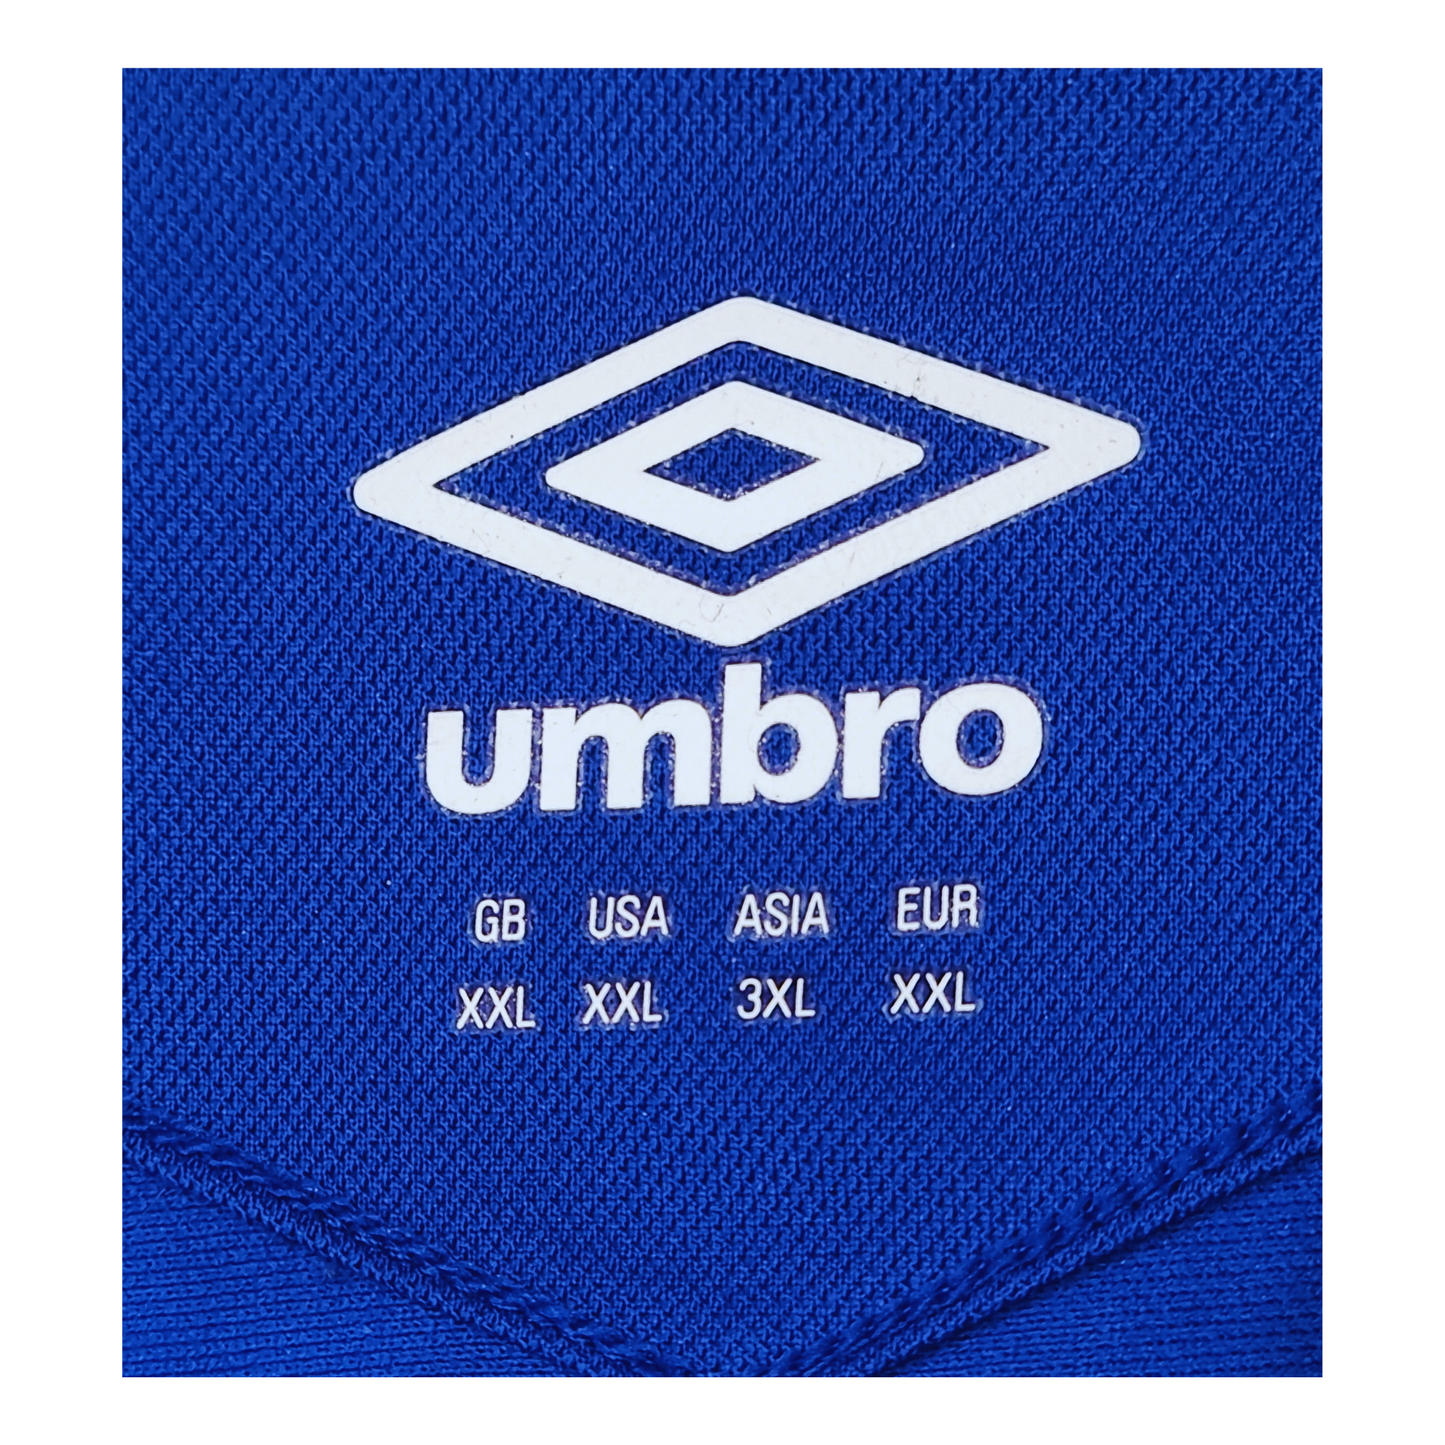 An Umbro Everton 2017/18 Home Jersey - Wayne Rooney with the Umbro logo on it.